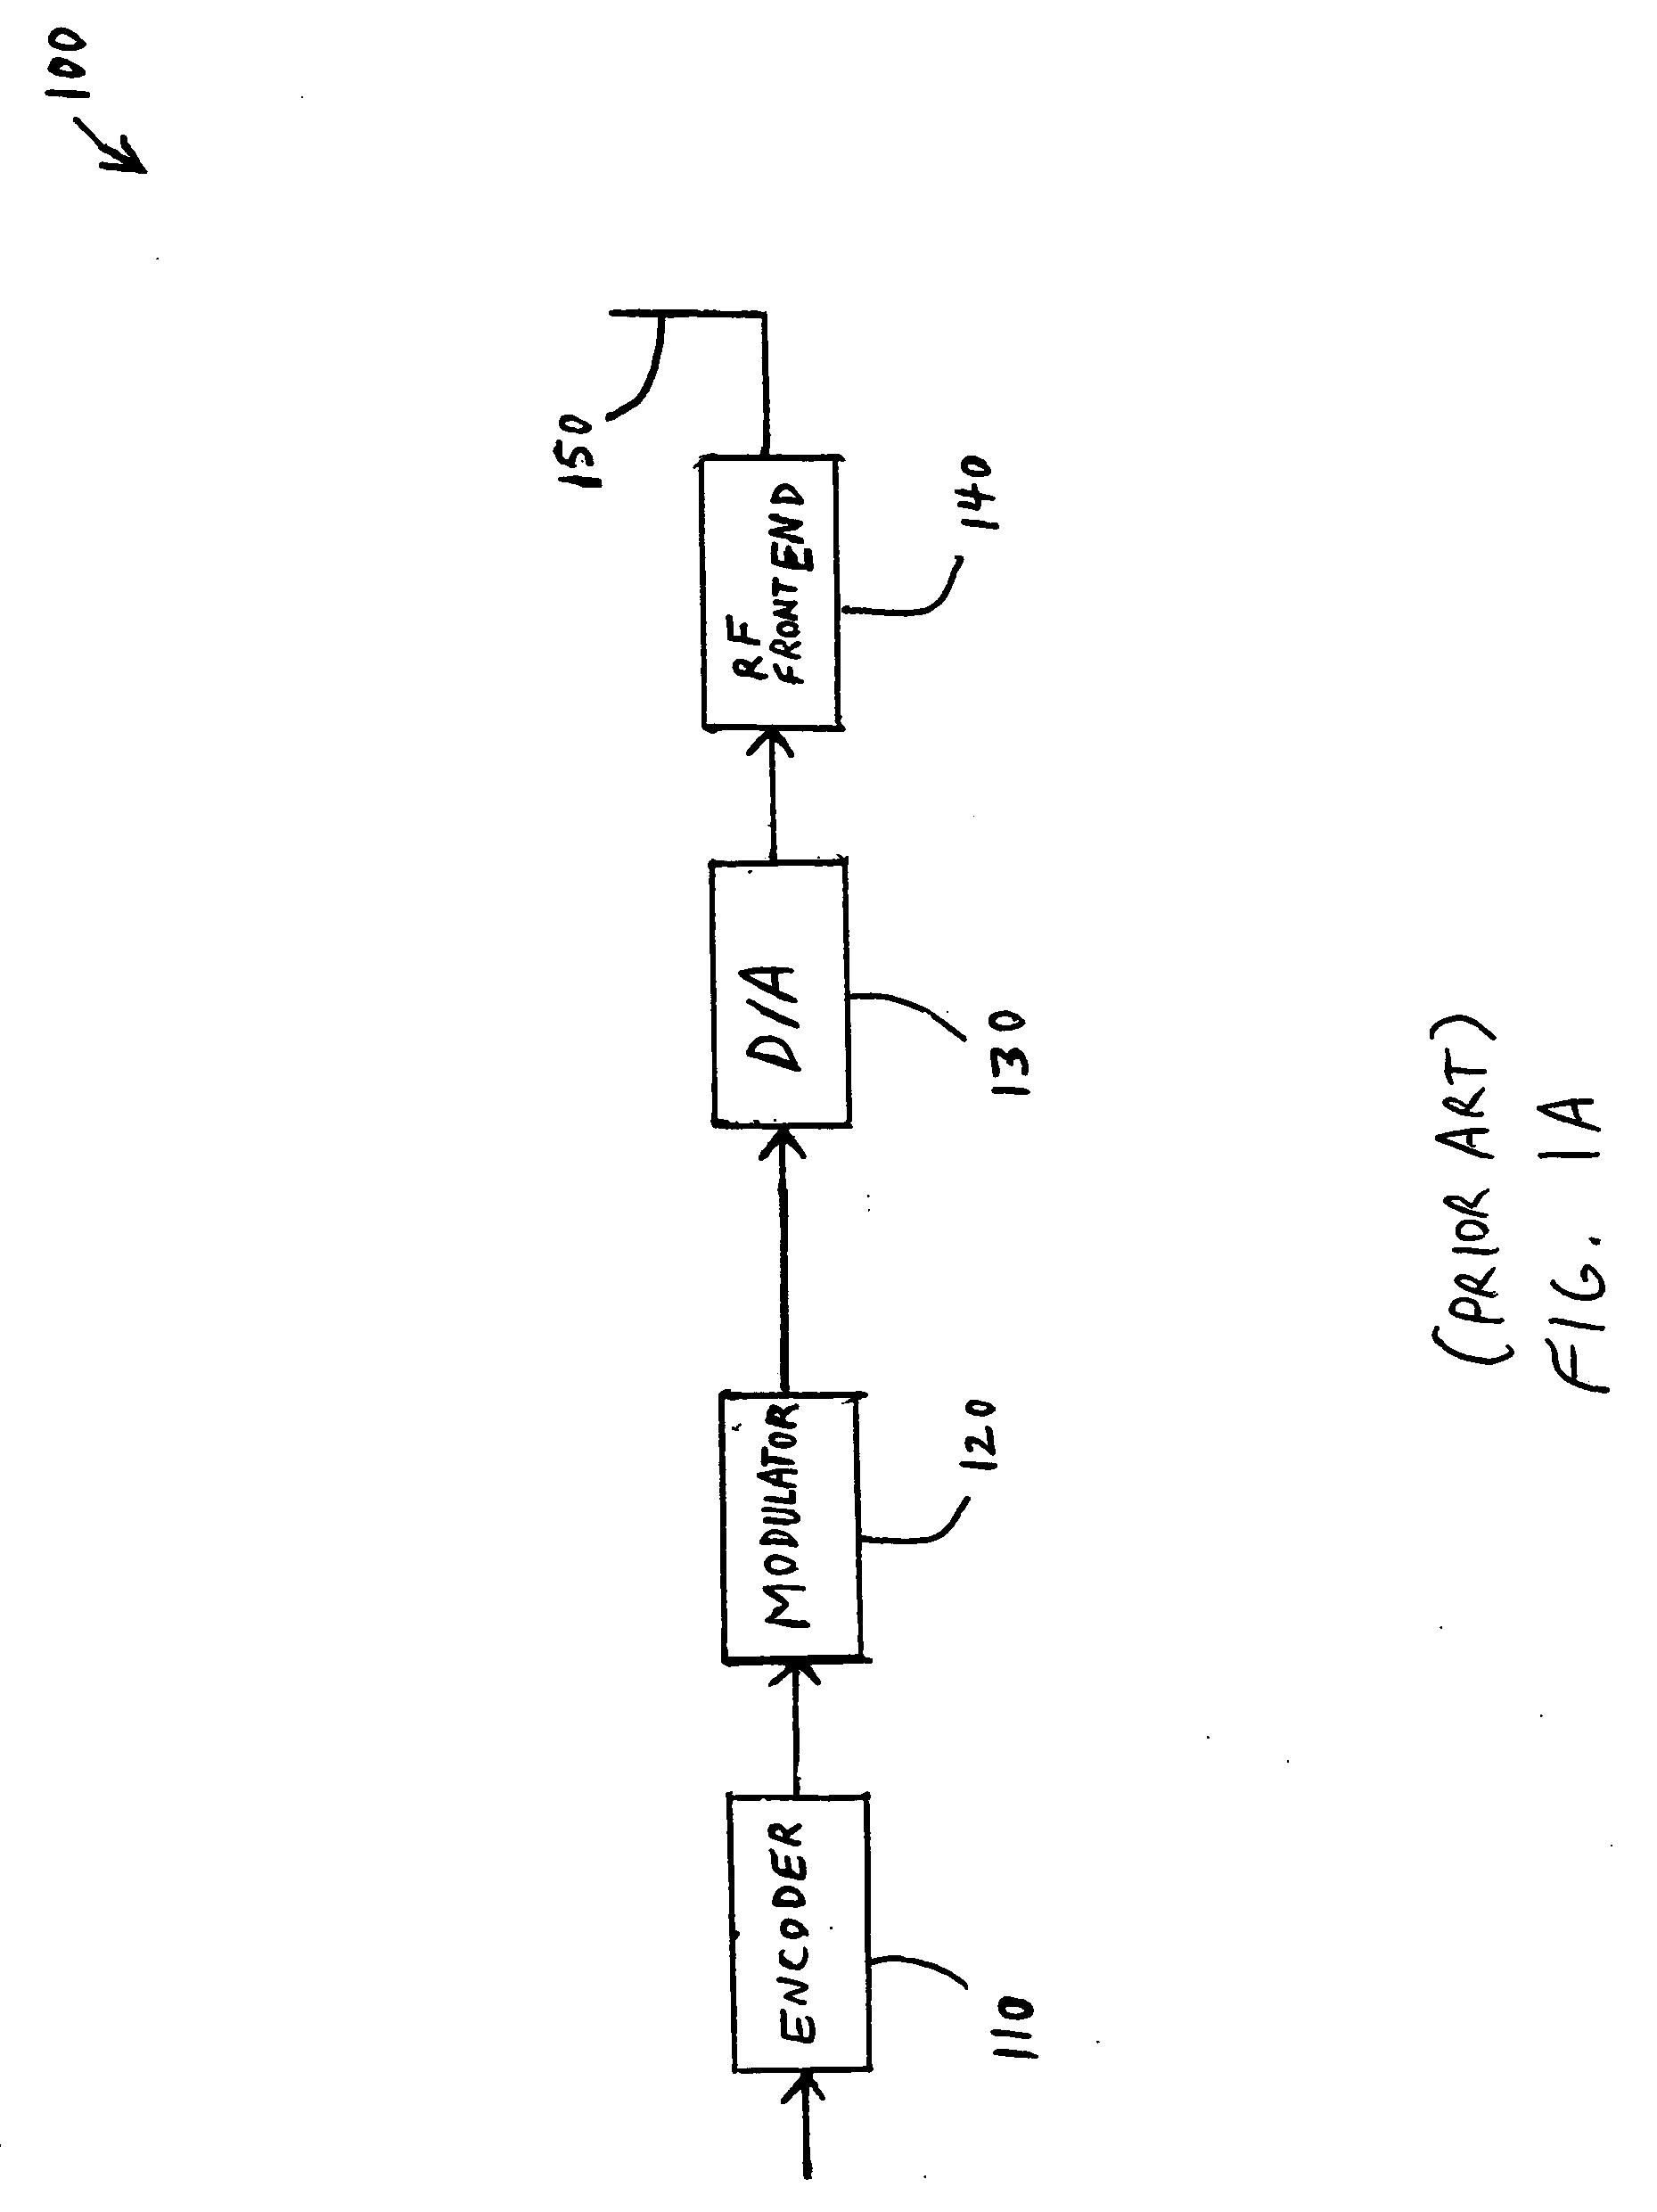 Apparatus and method of multiple antenna transmitter beamforming of high data rate wideband packetized wireless communication signals